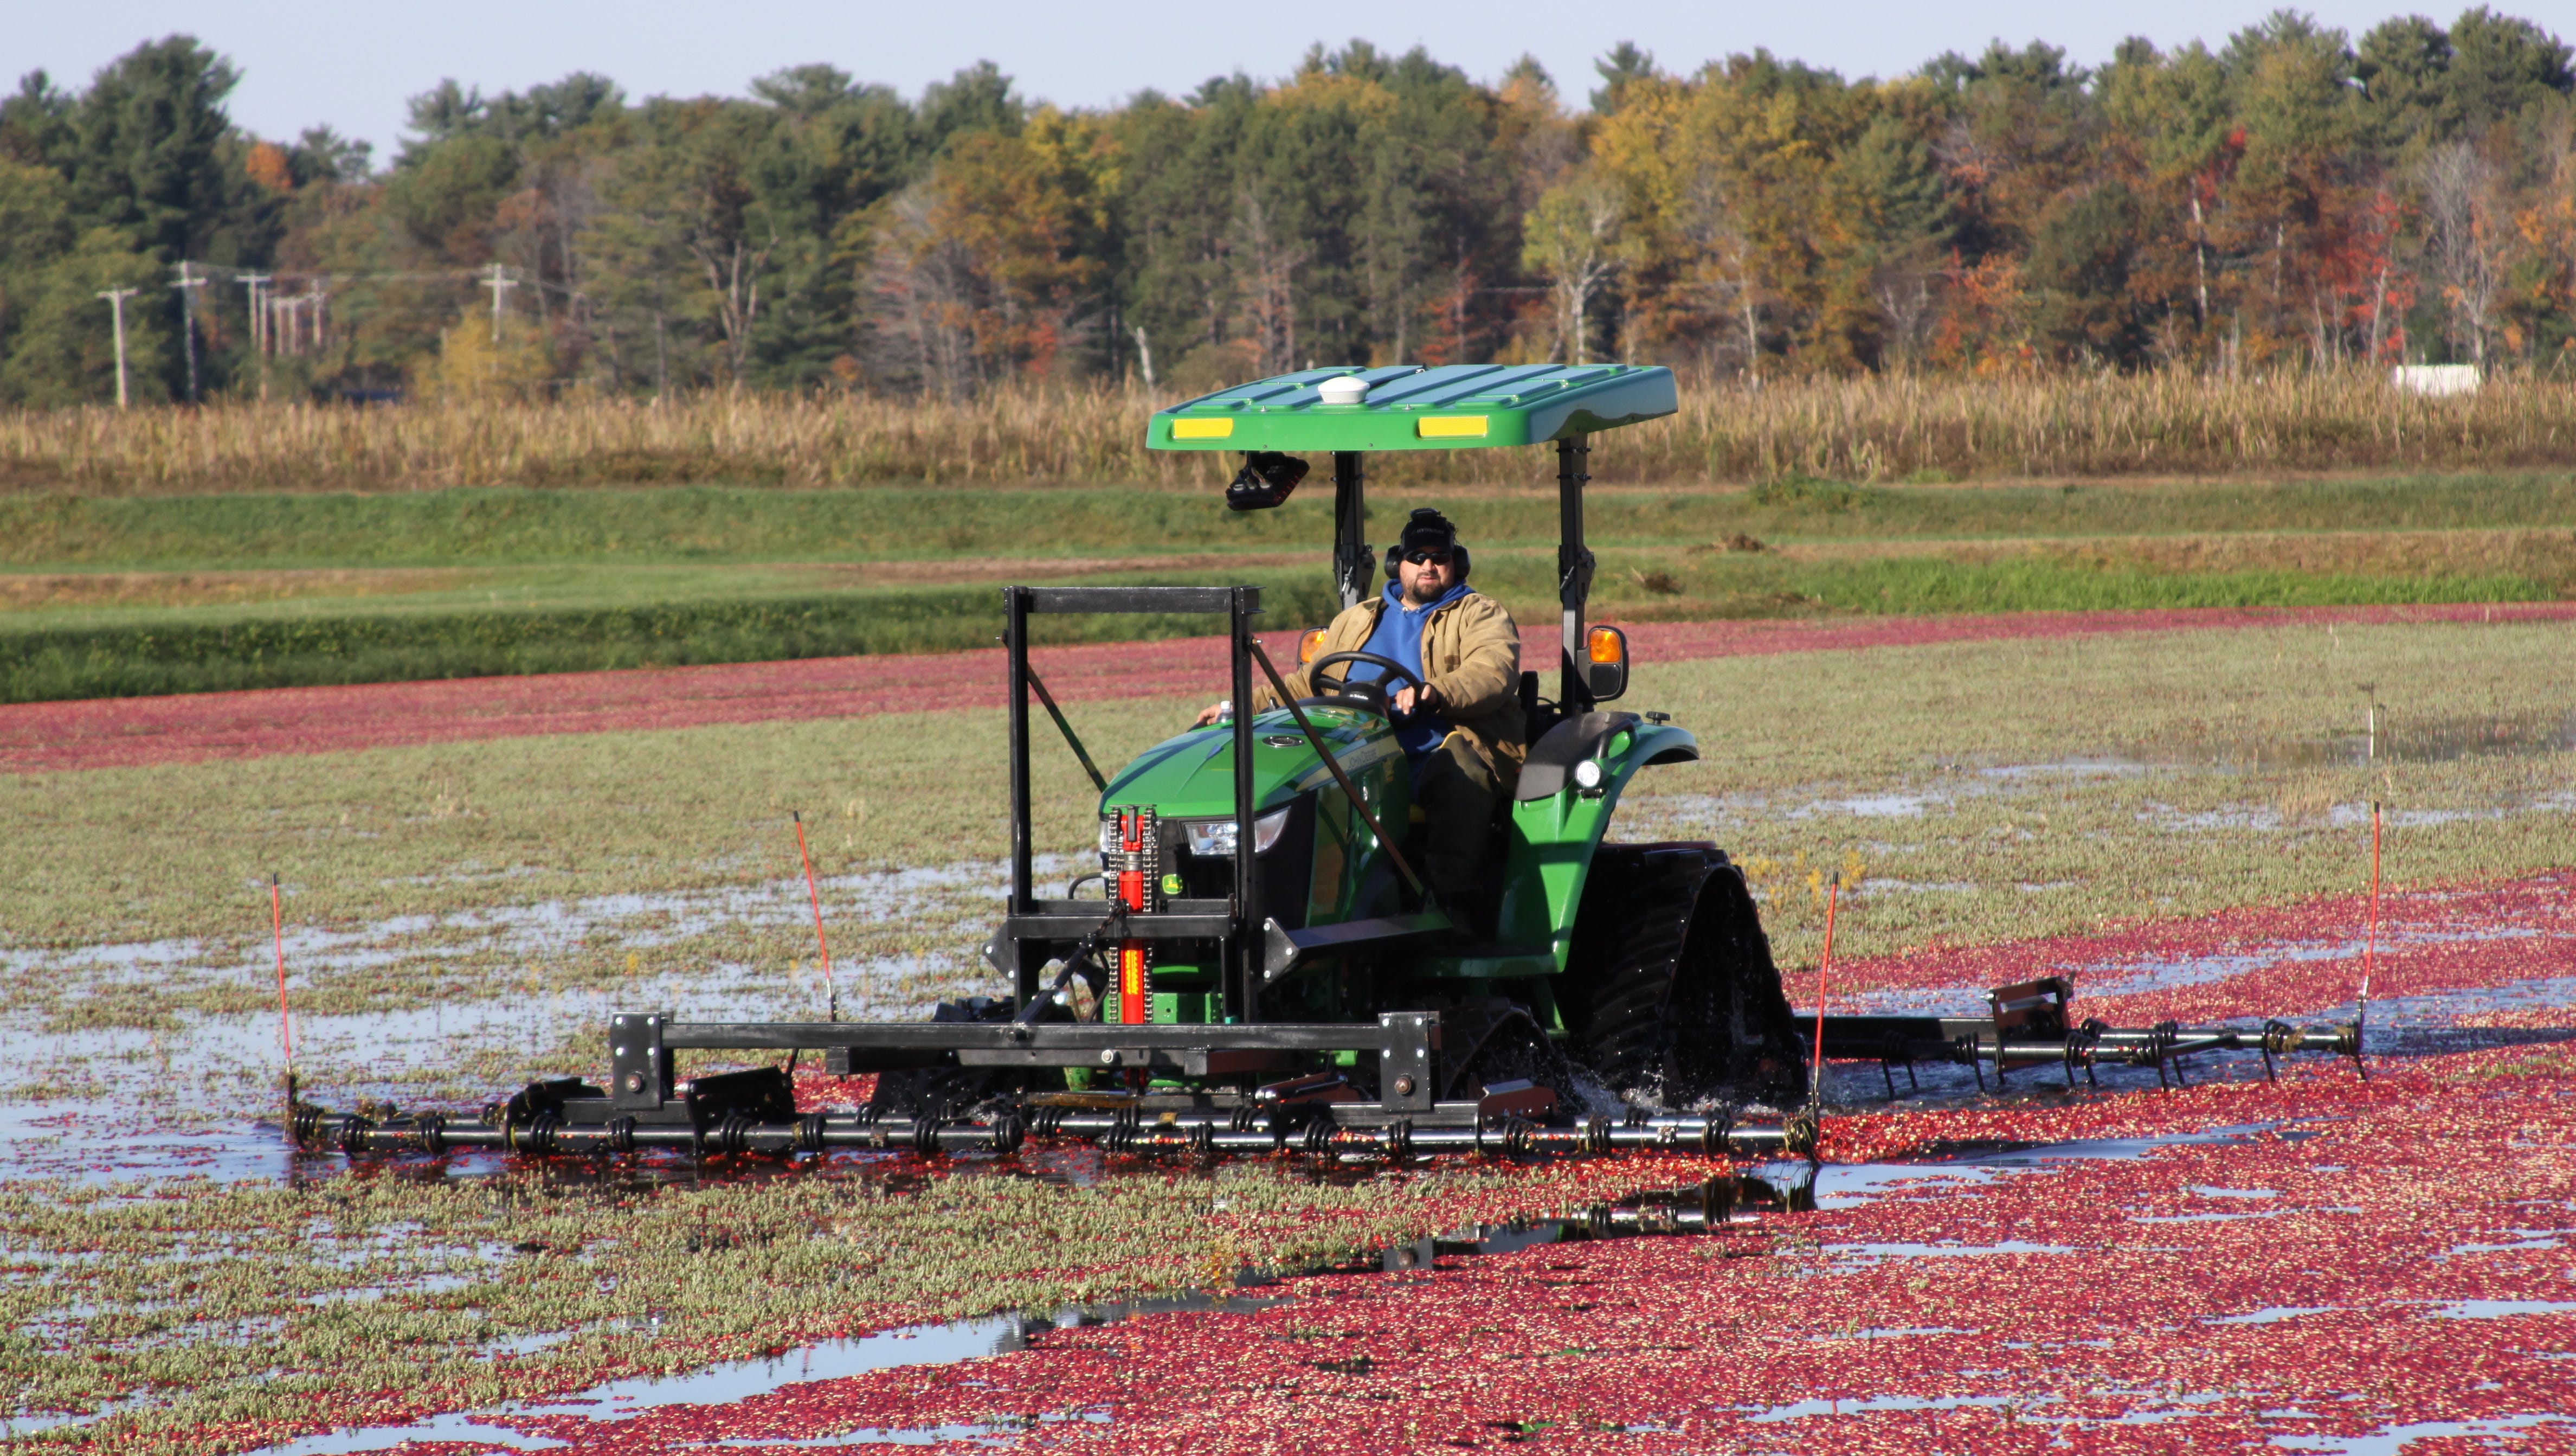 Machinery that loosens the cranberries from the vines which allows them to float to the top of the flooded bog will soon be on the move this fall, as the U.S. Cranberry Marketing Committee says Wisconsin growers are expected to harvest an estimated 4.7 million barrels of fruit this fall.